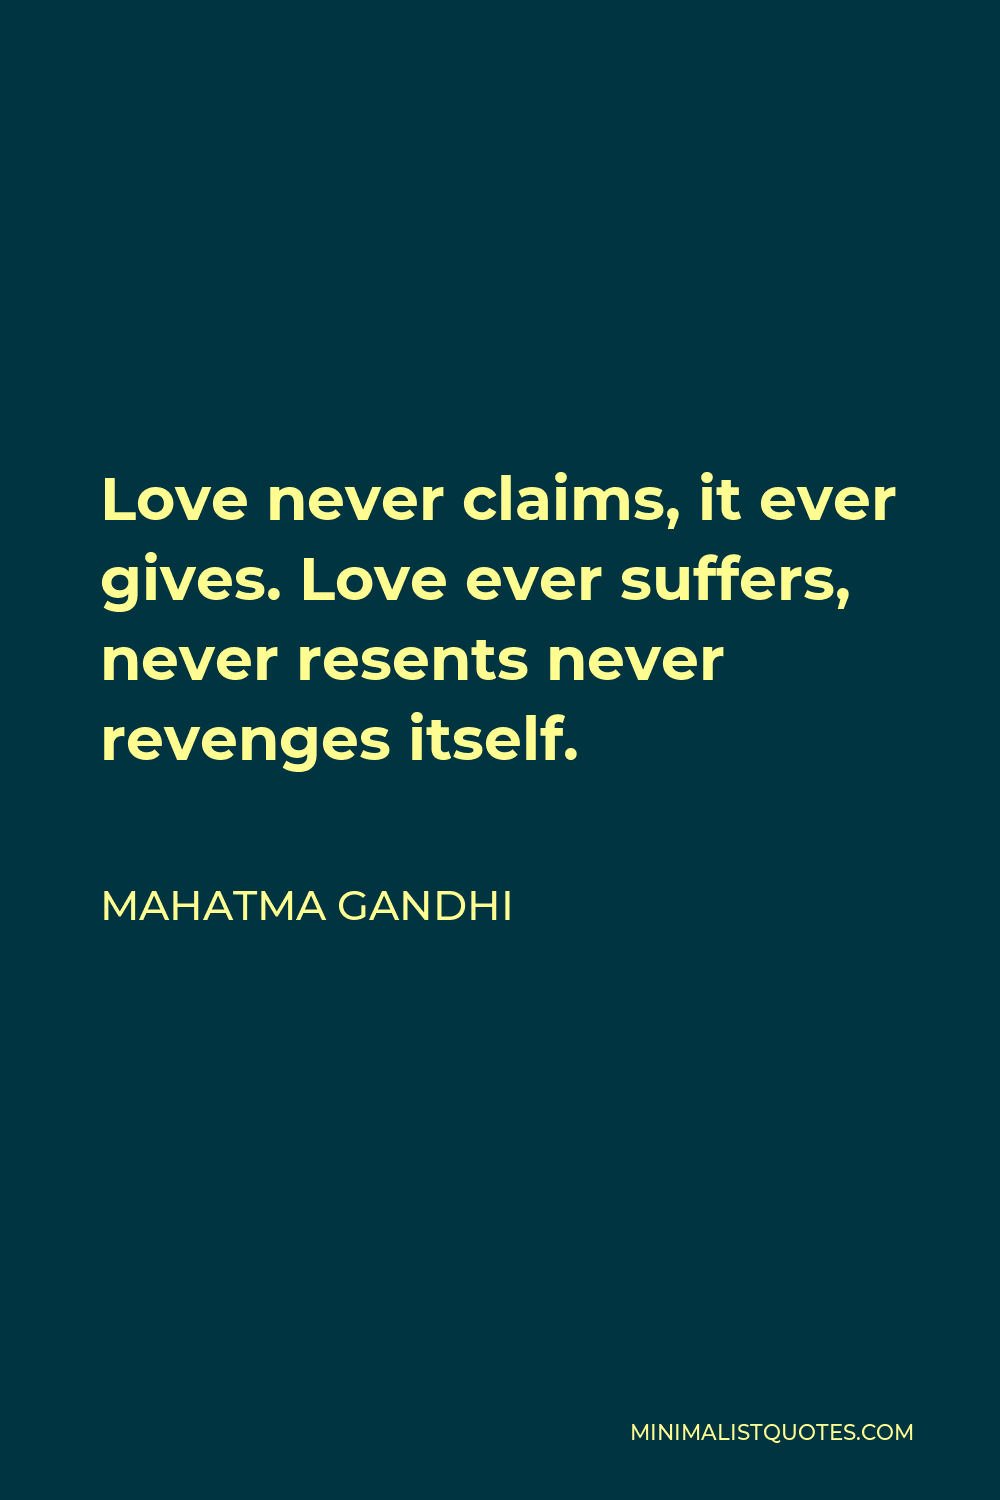 Mahatma Gandhi Quote - Love never claims, it ever gives. Love ever suffers, never resents never revenges itself.